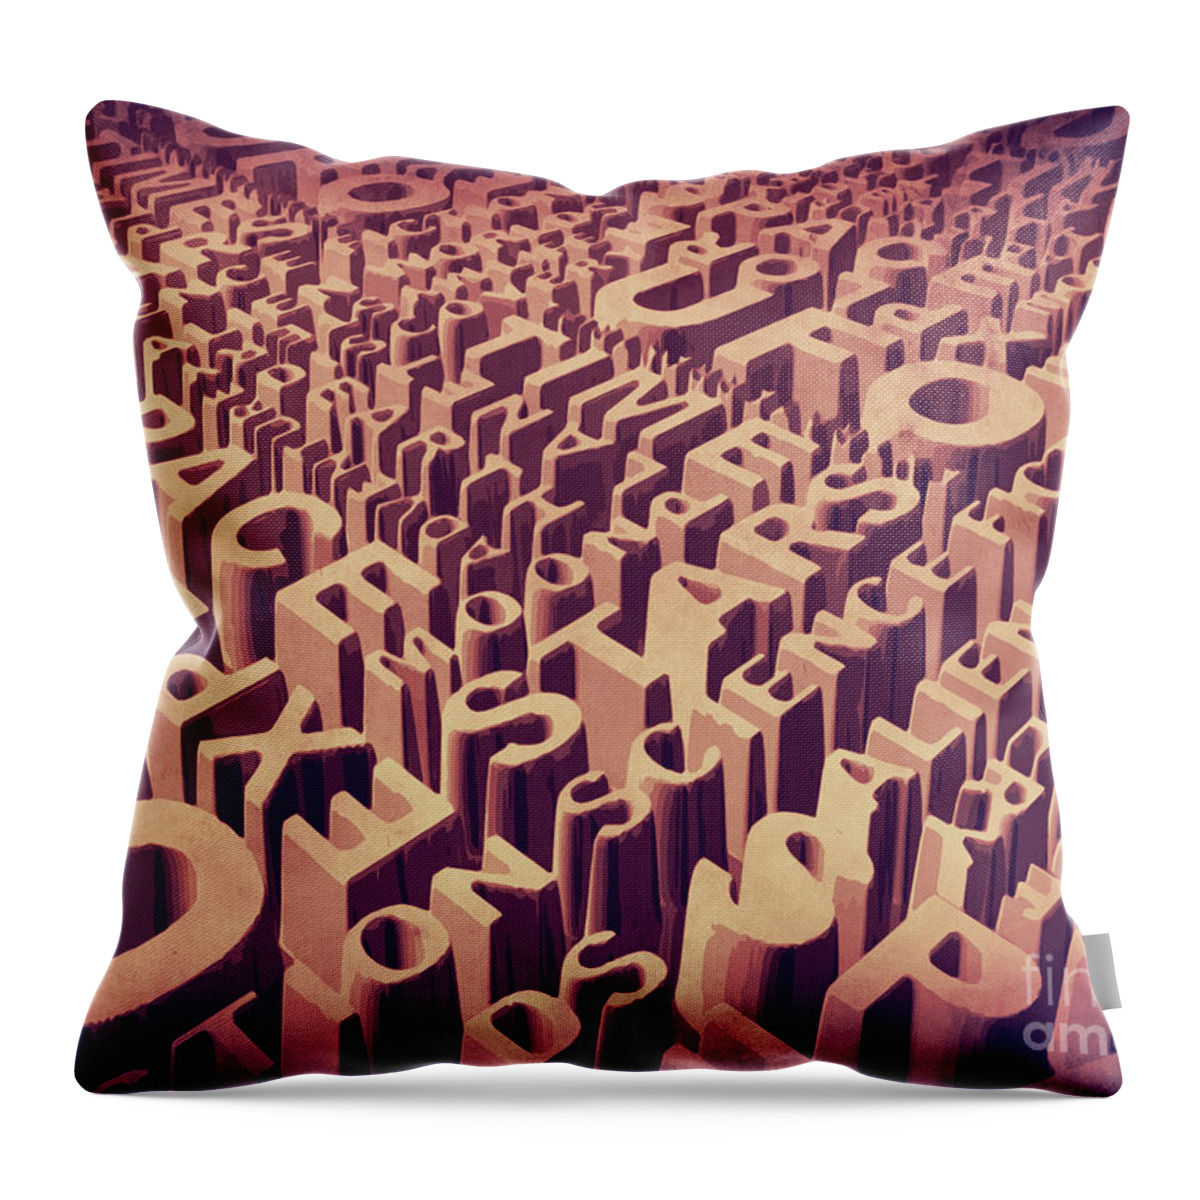 Space Throw Pillow featuring the digital art Letters From Space by Phil Perkins